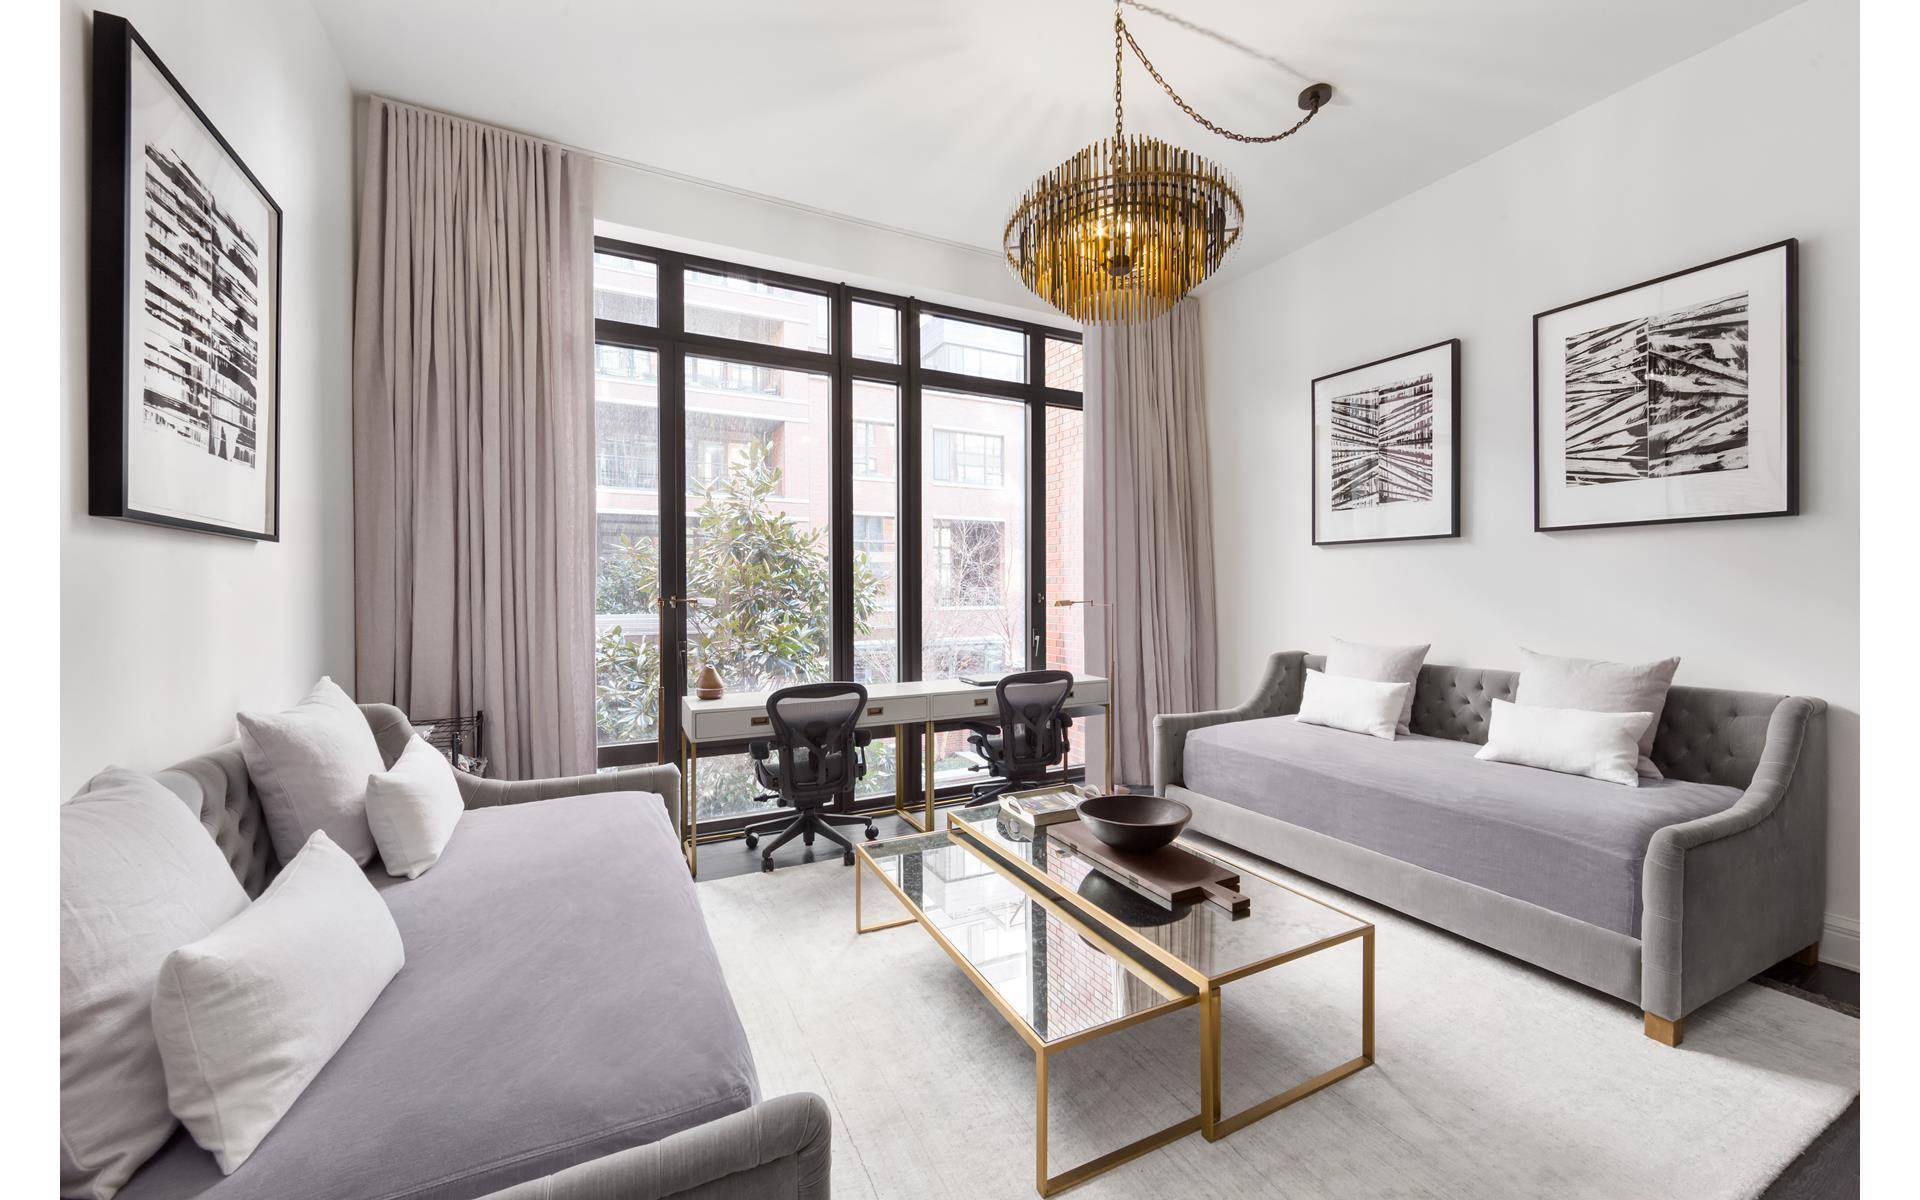 No Fee ! This large 1BR 1BA residence in the West Village features 11ft ceilings highly crafted details, deeply luxurious finishes, and views over the lush private garden of The ...